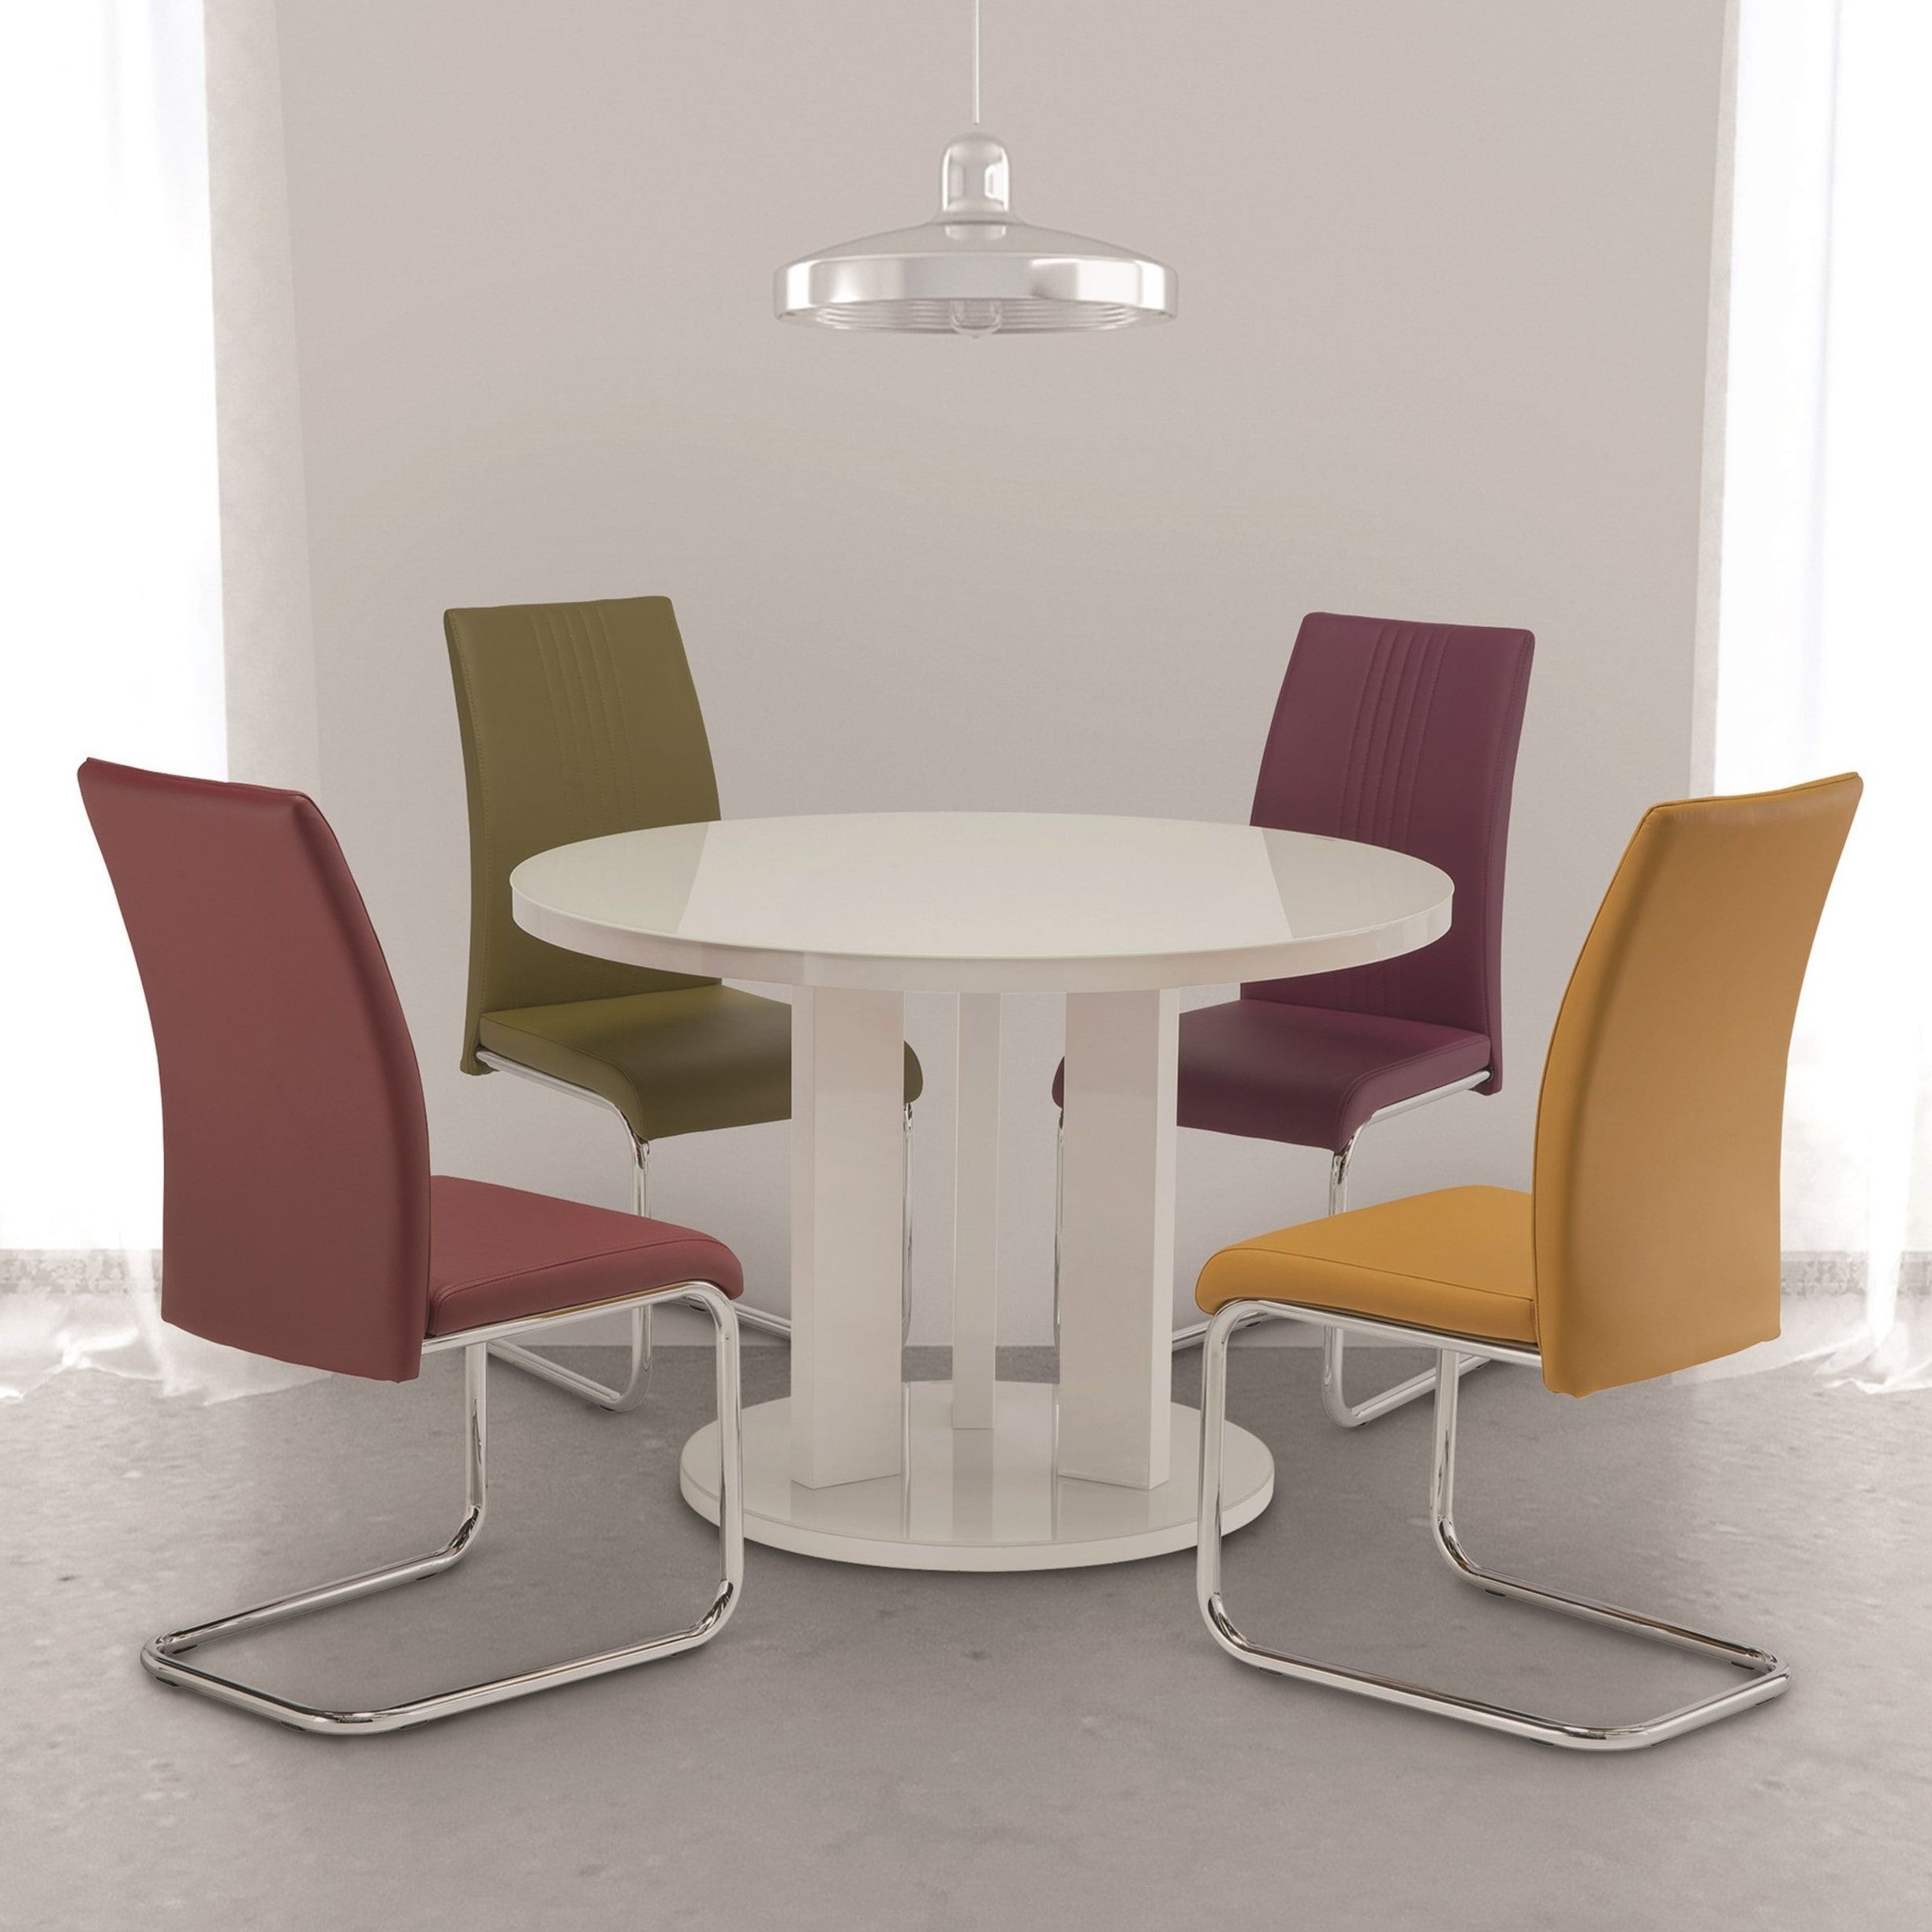 Ellie 4 Seater Round Dining Table White